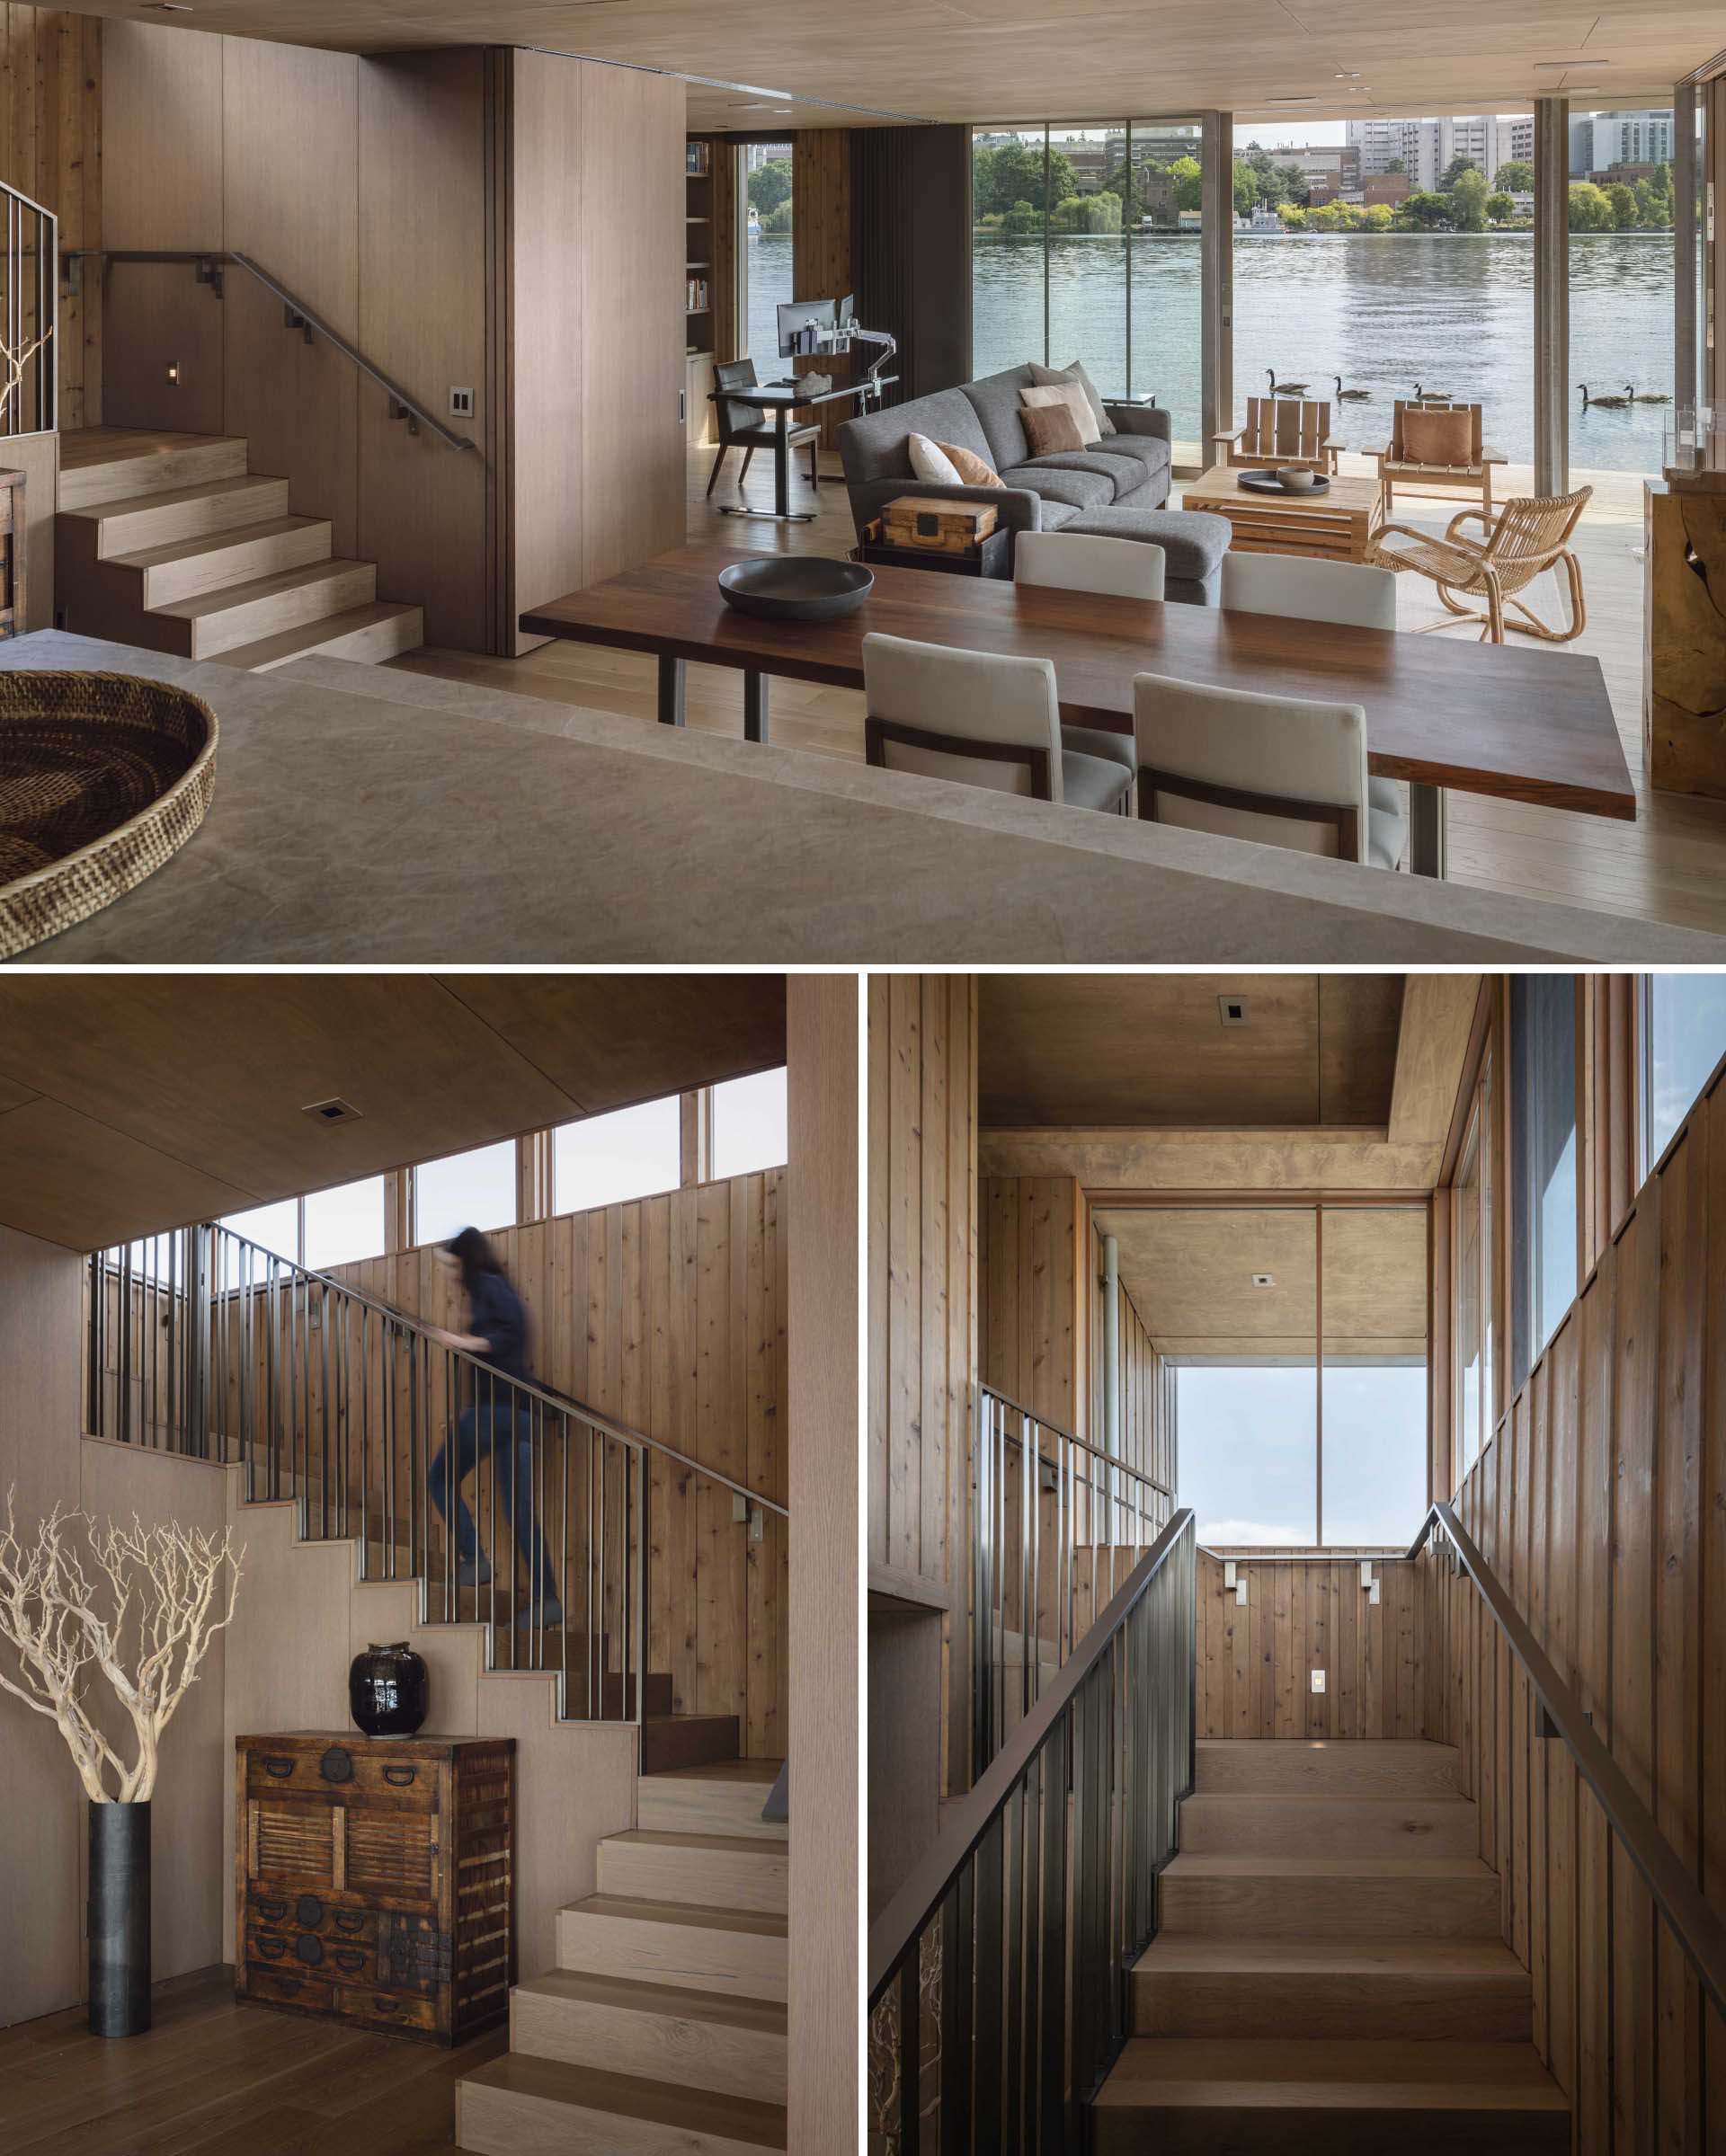 The staircase to the second level  of this modern floathome, includes knotty wood wall finishes, and acts as a lightwell to capture natural daylight.